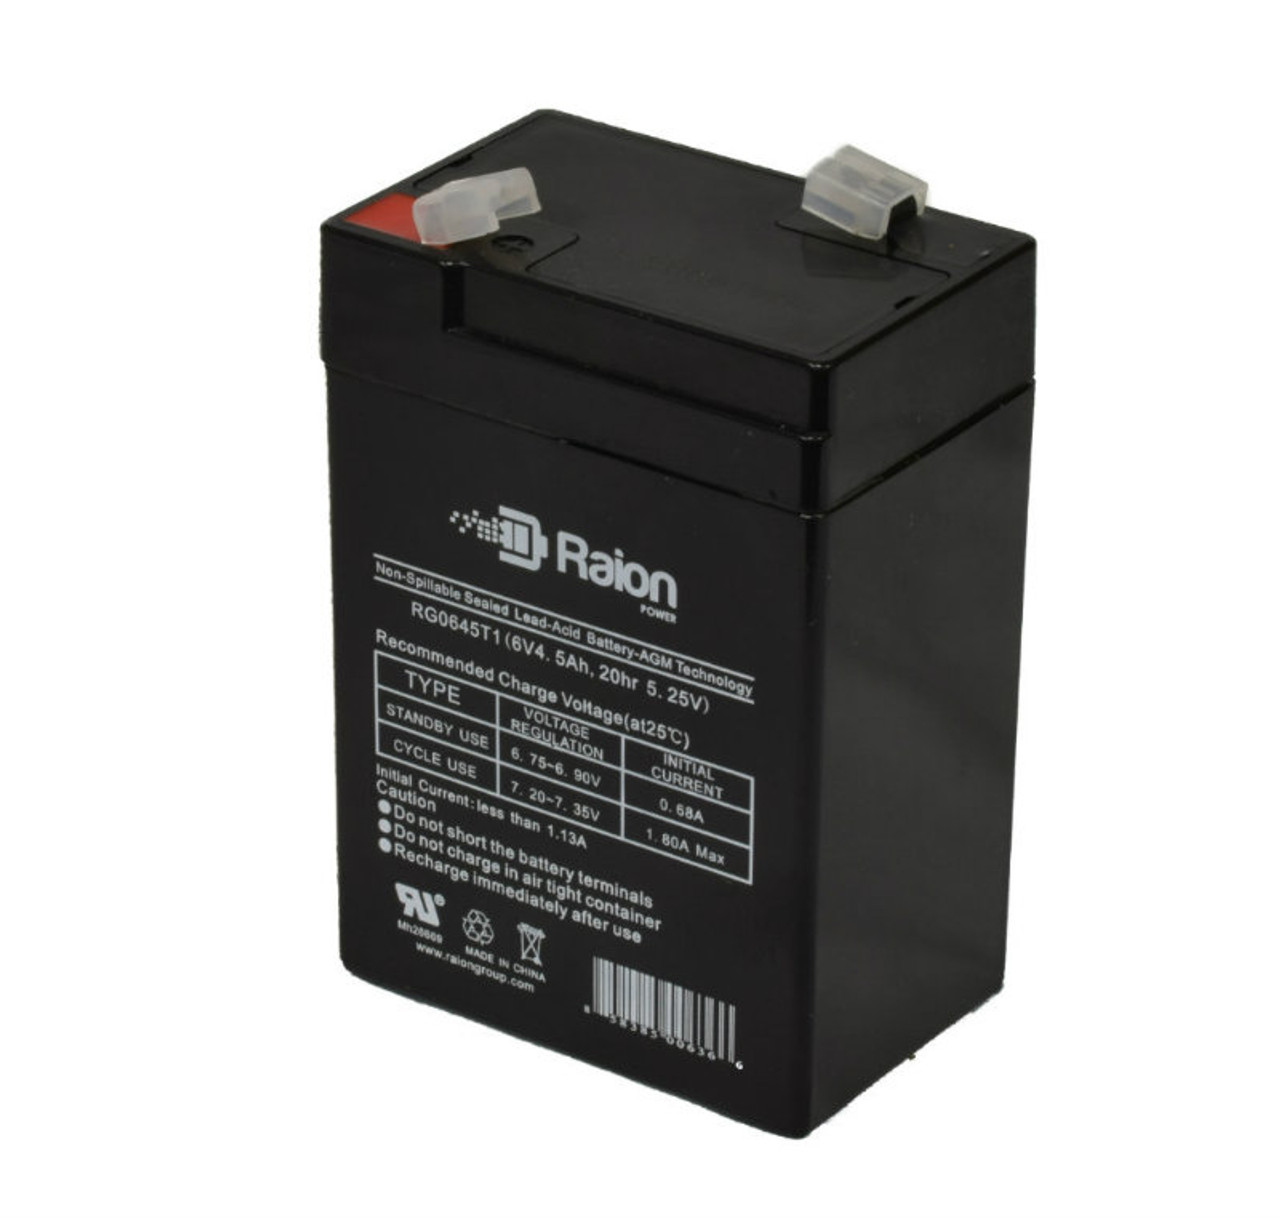 Raion Power RG0645T1 6V 4.5Ah Replacement Battery Cartridge for NEATA NT6-6.5